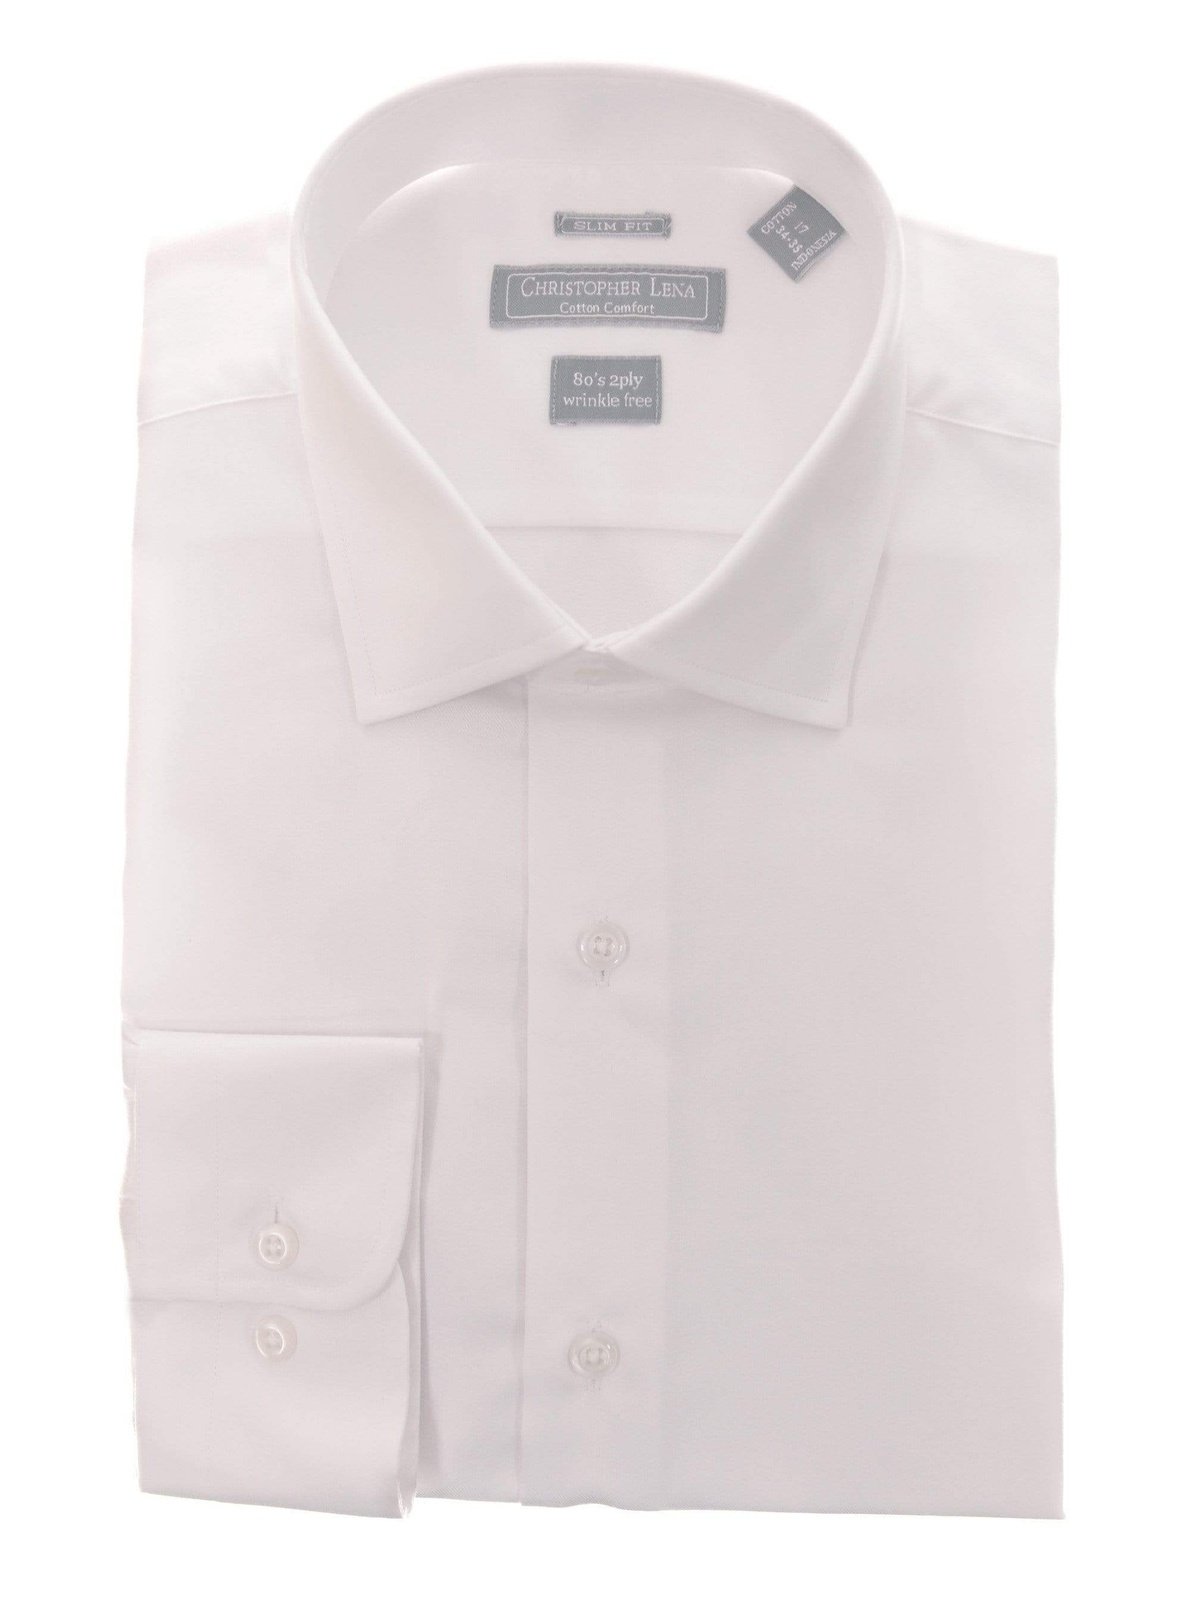 Christopher Lena SHIRTS White / 15 1/2 32/33 Mens Slim Fit Solid Spread Collar Cotton Wrinkle Free Dress Shirt